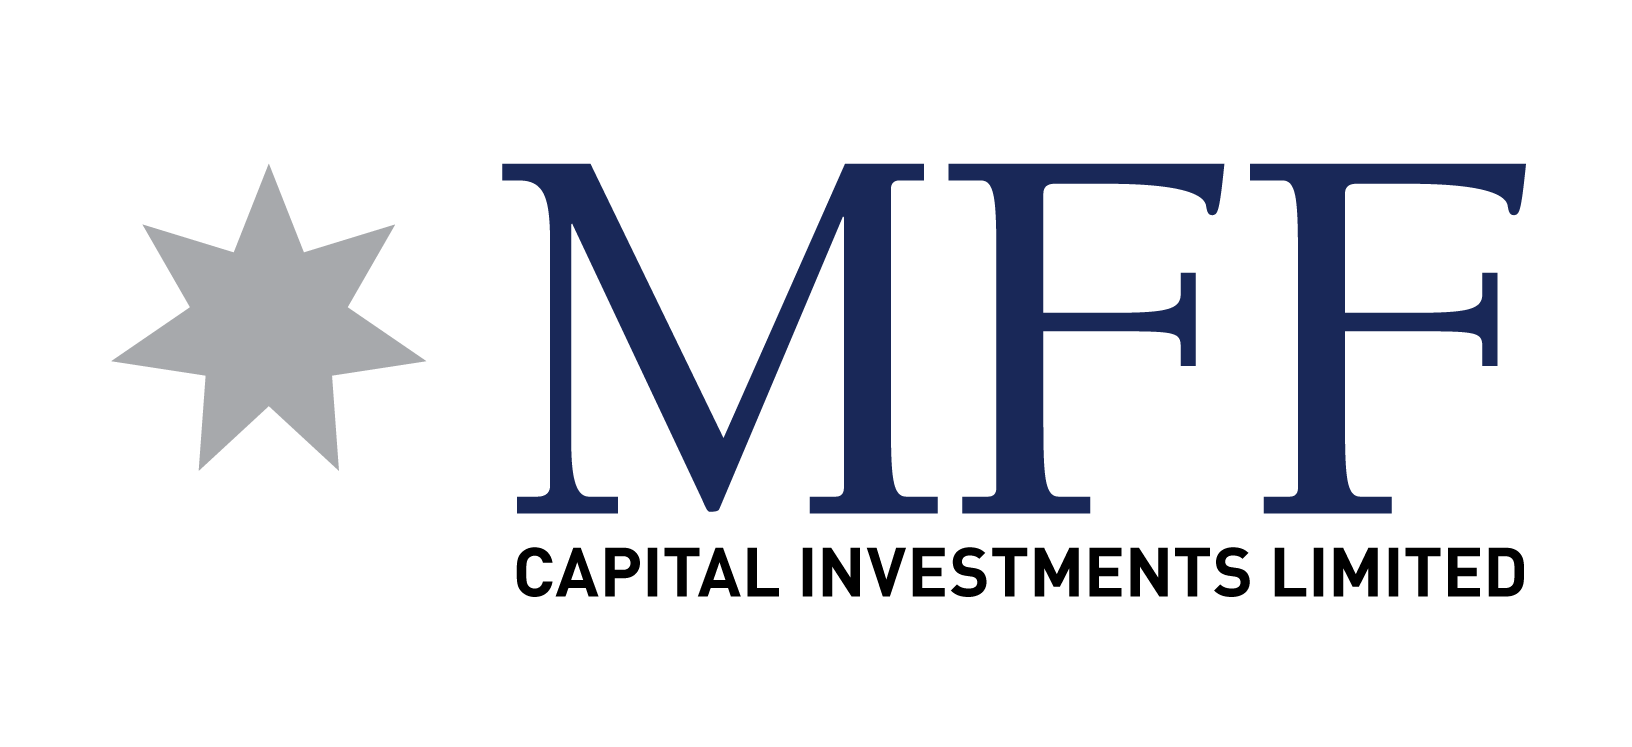 Mff Capital Investments Limited (MFF:ASX) logo